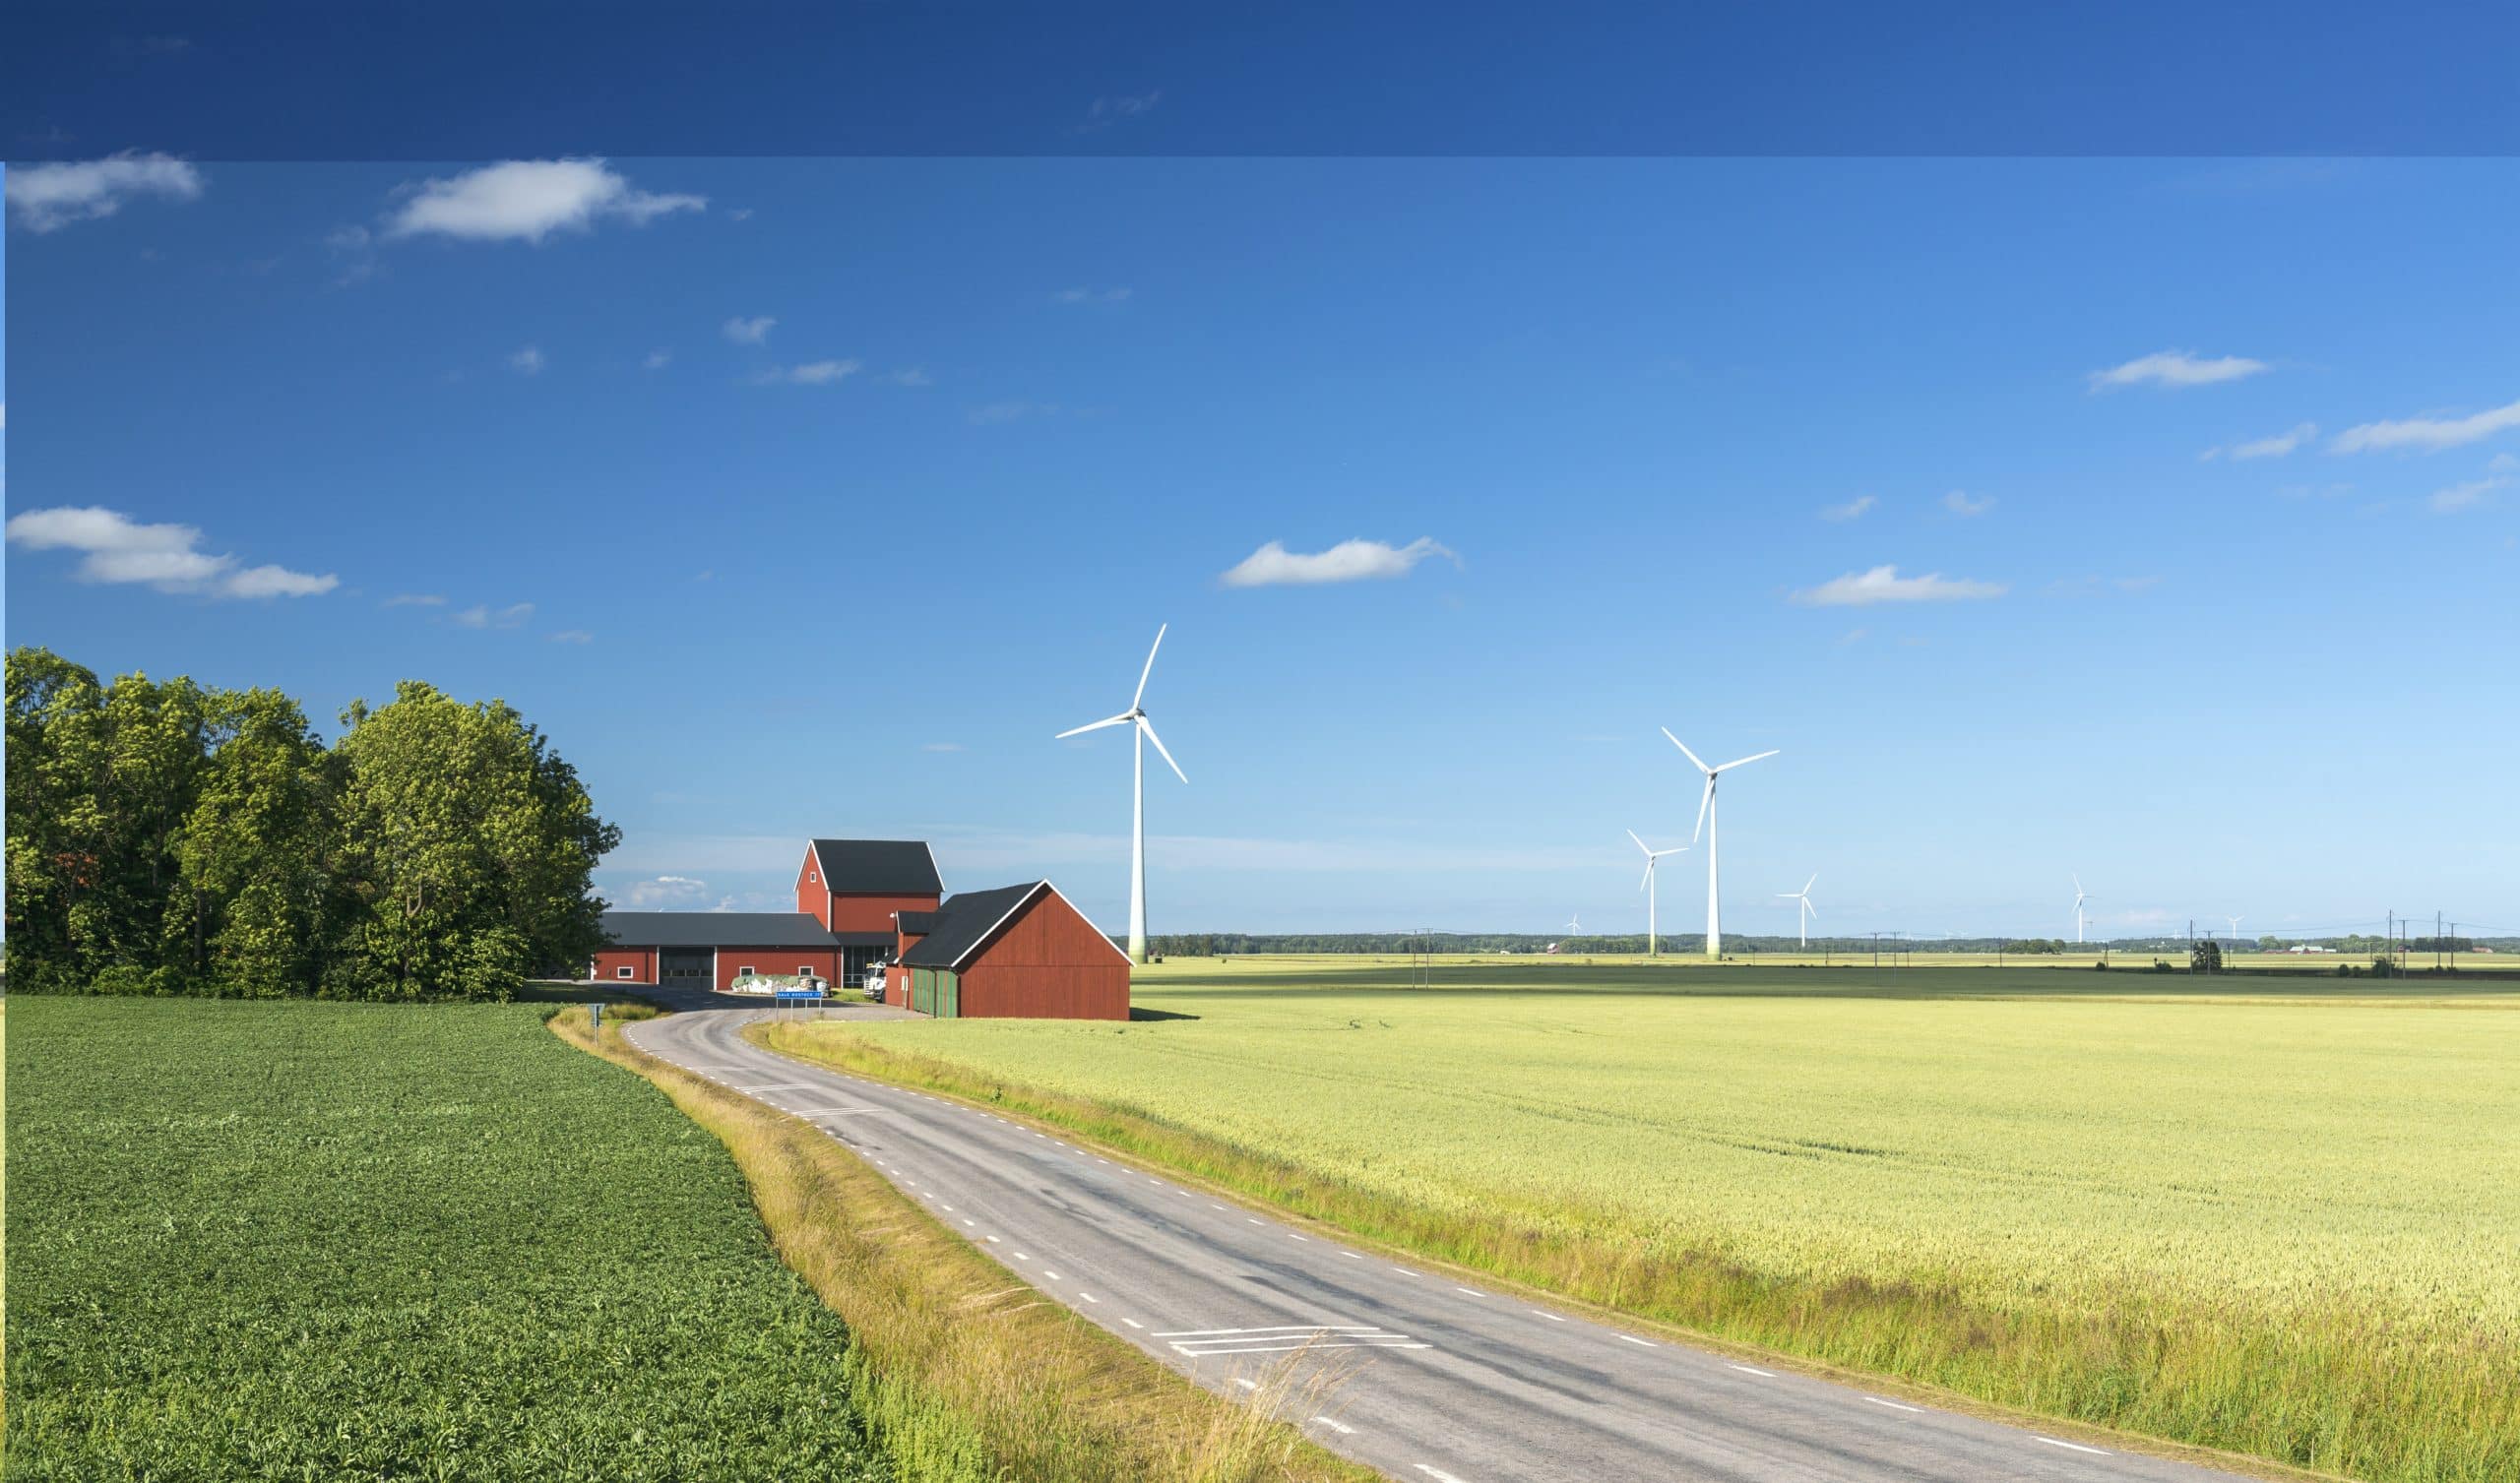 In the province of Dasland in Sweden, a few wind turbines surround a traditional red Swedish farmhouse in a yellow wheat fields. The panoramic view is composed of colorful colors, the yellow wheat, a clear blue sky and a red farmhouse. With the wind turbines, the image also displays the modern high technology used for the environmental protection of the nature and the traditional farming.